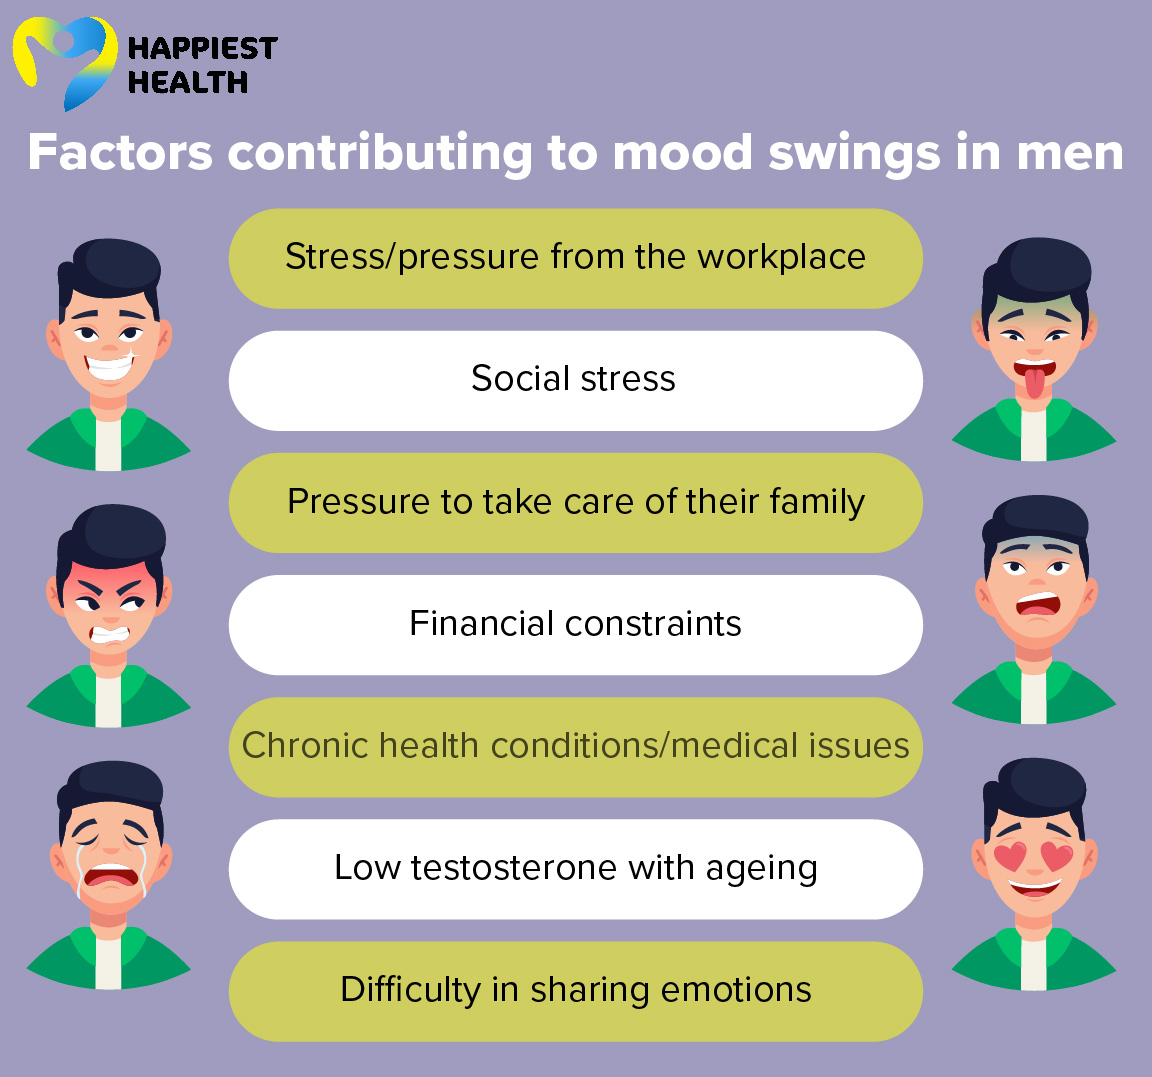 Factors contributing to mood swings in men -Stress/pressure from the workplace -Social Stress -Pressure to take care of their family -Financial constraints -Chronic health conditions/medical issues -Low testosterone with ageing -Difficulty in sharing emotions 